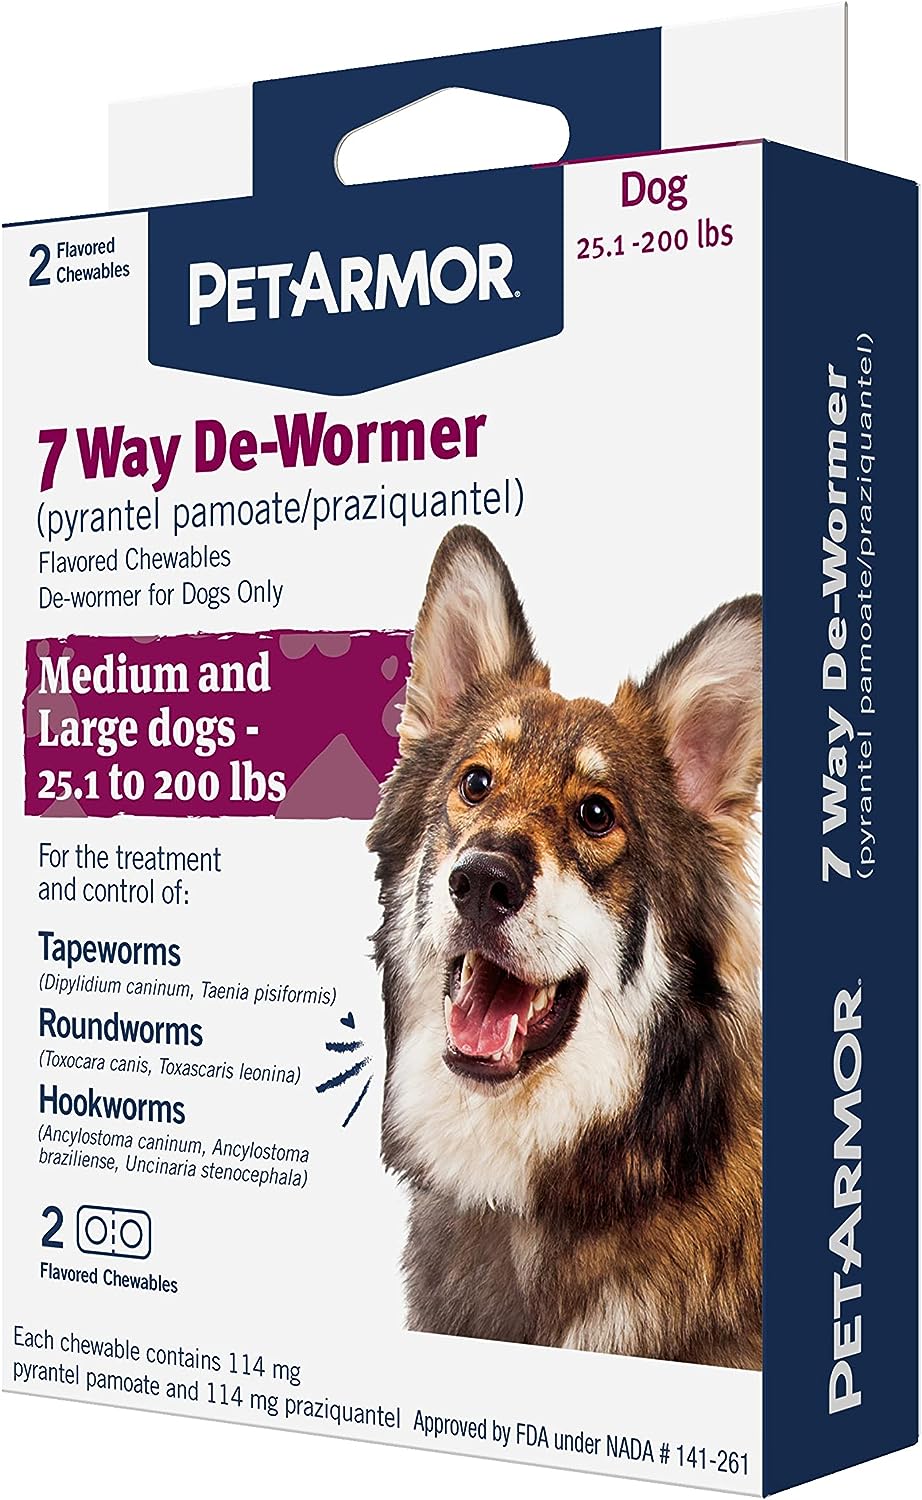 PetArmor 7 Way De-Wormer for Dogs, Oral Treatment for Tapeworm, Roundworm & Hookworm in Large Dogs & Puppies (Over 25 lbs), Worm Remover (Praziquantel & Pyrantel Pamoate), 2 Flavored Chewables